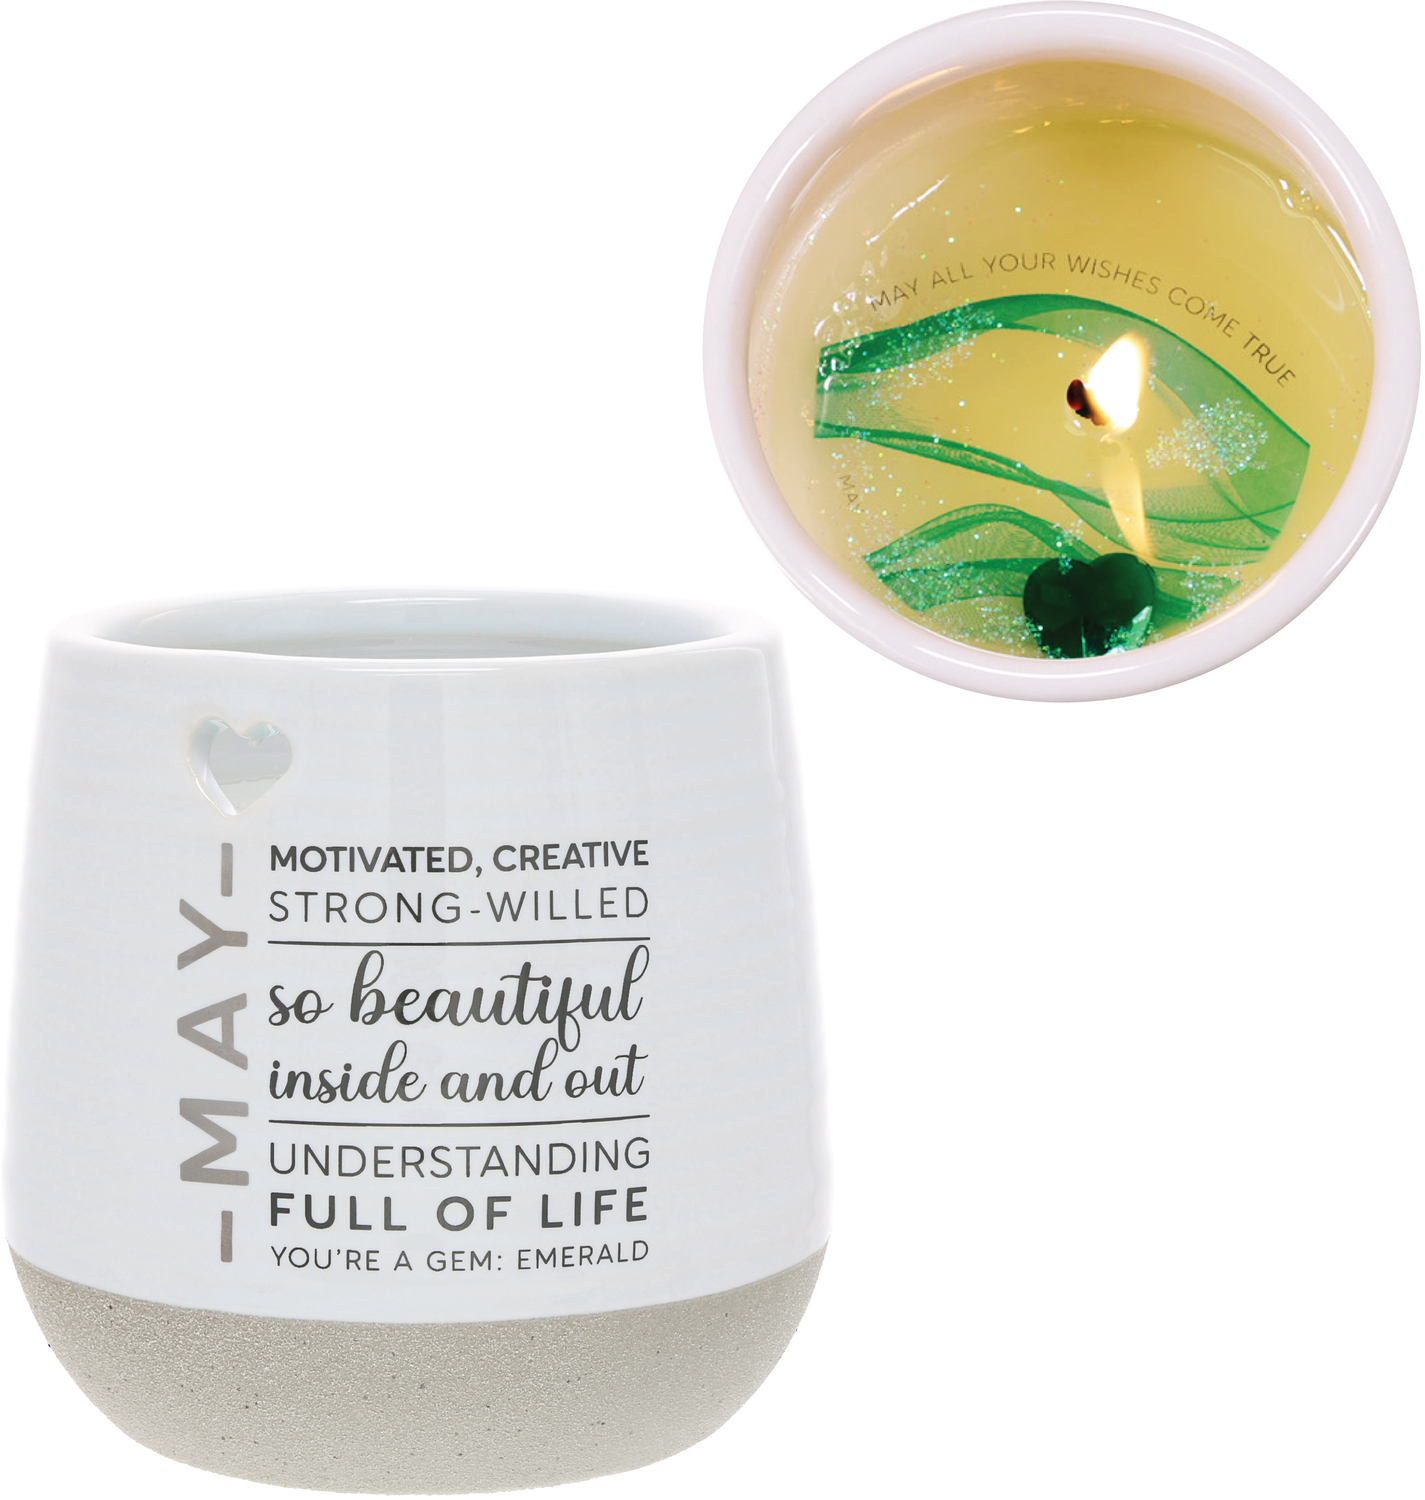 May by You Are a Gem - May - 11 oz - 100% Soy Wax Reveal Candle with Birthstone Scent: Tranquility